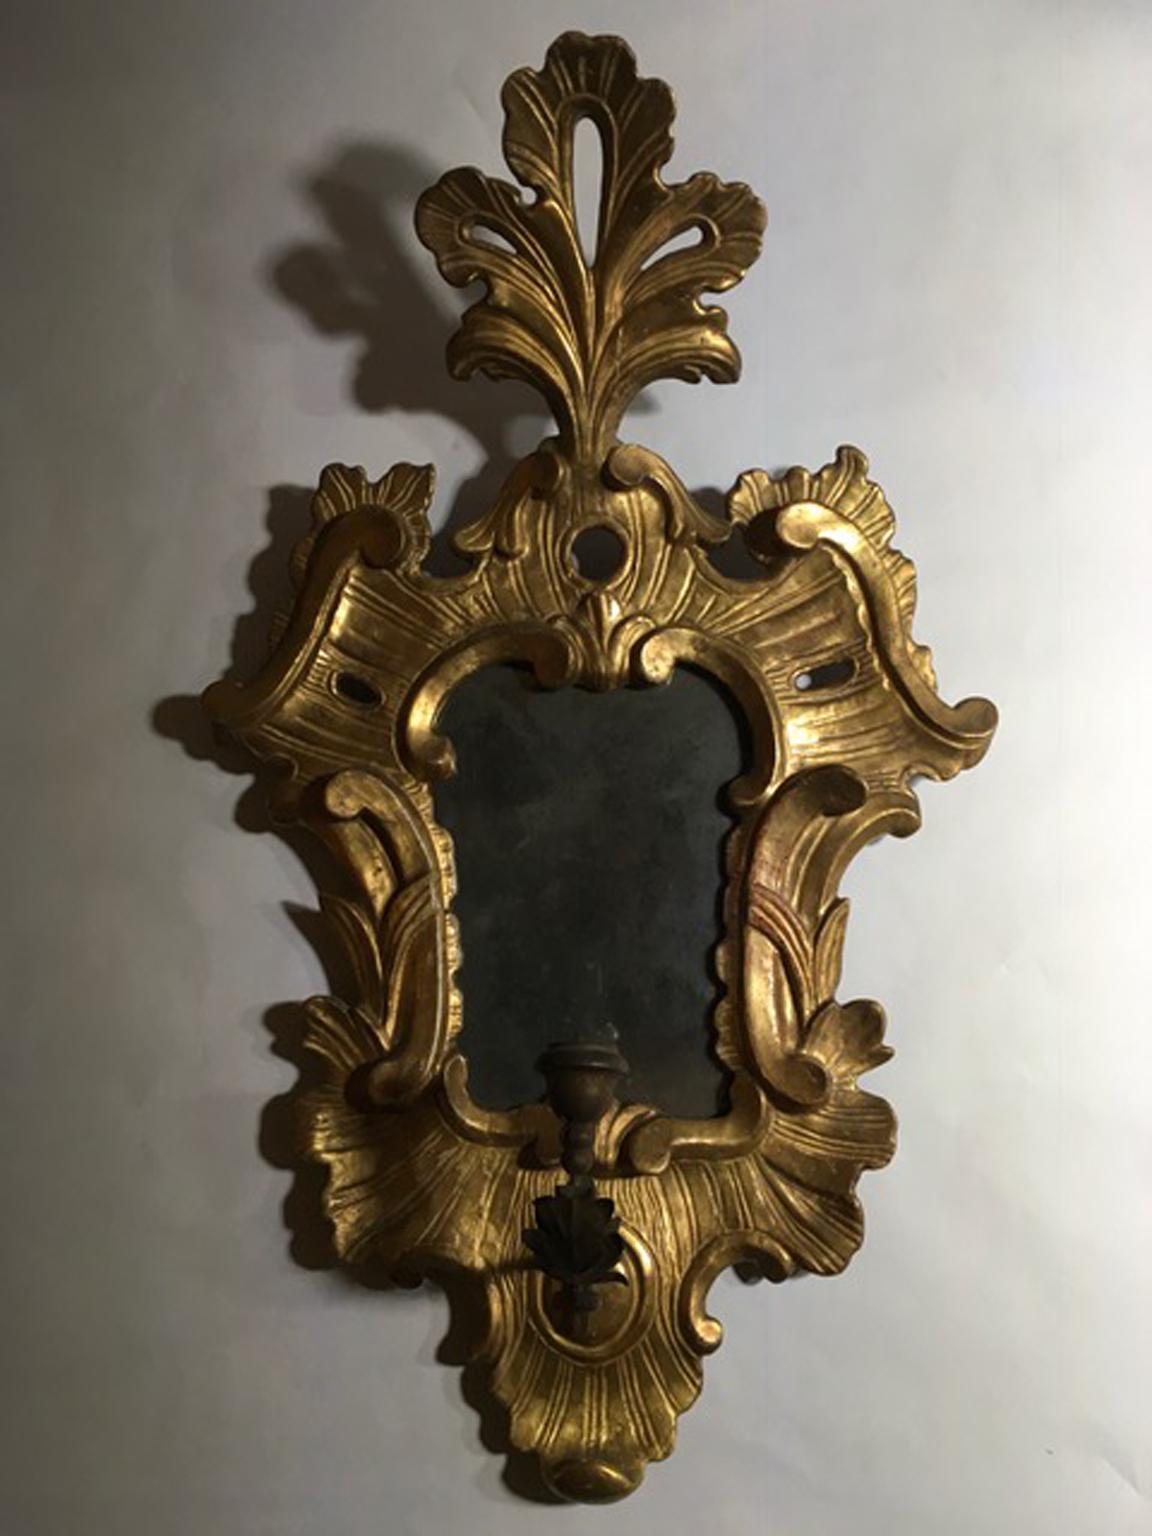 Italy late 18th century pair of sconces with original mercury mirrors in golden wooden frames in Louis XV Style

It is not easy to find these pair of sconces with their own intact original mercury mirrors.
The handmade pinewood frames have some less